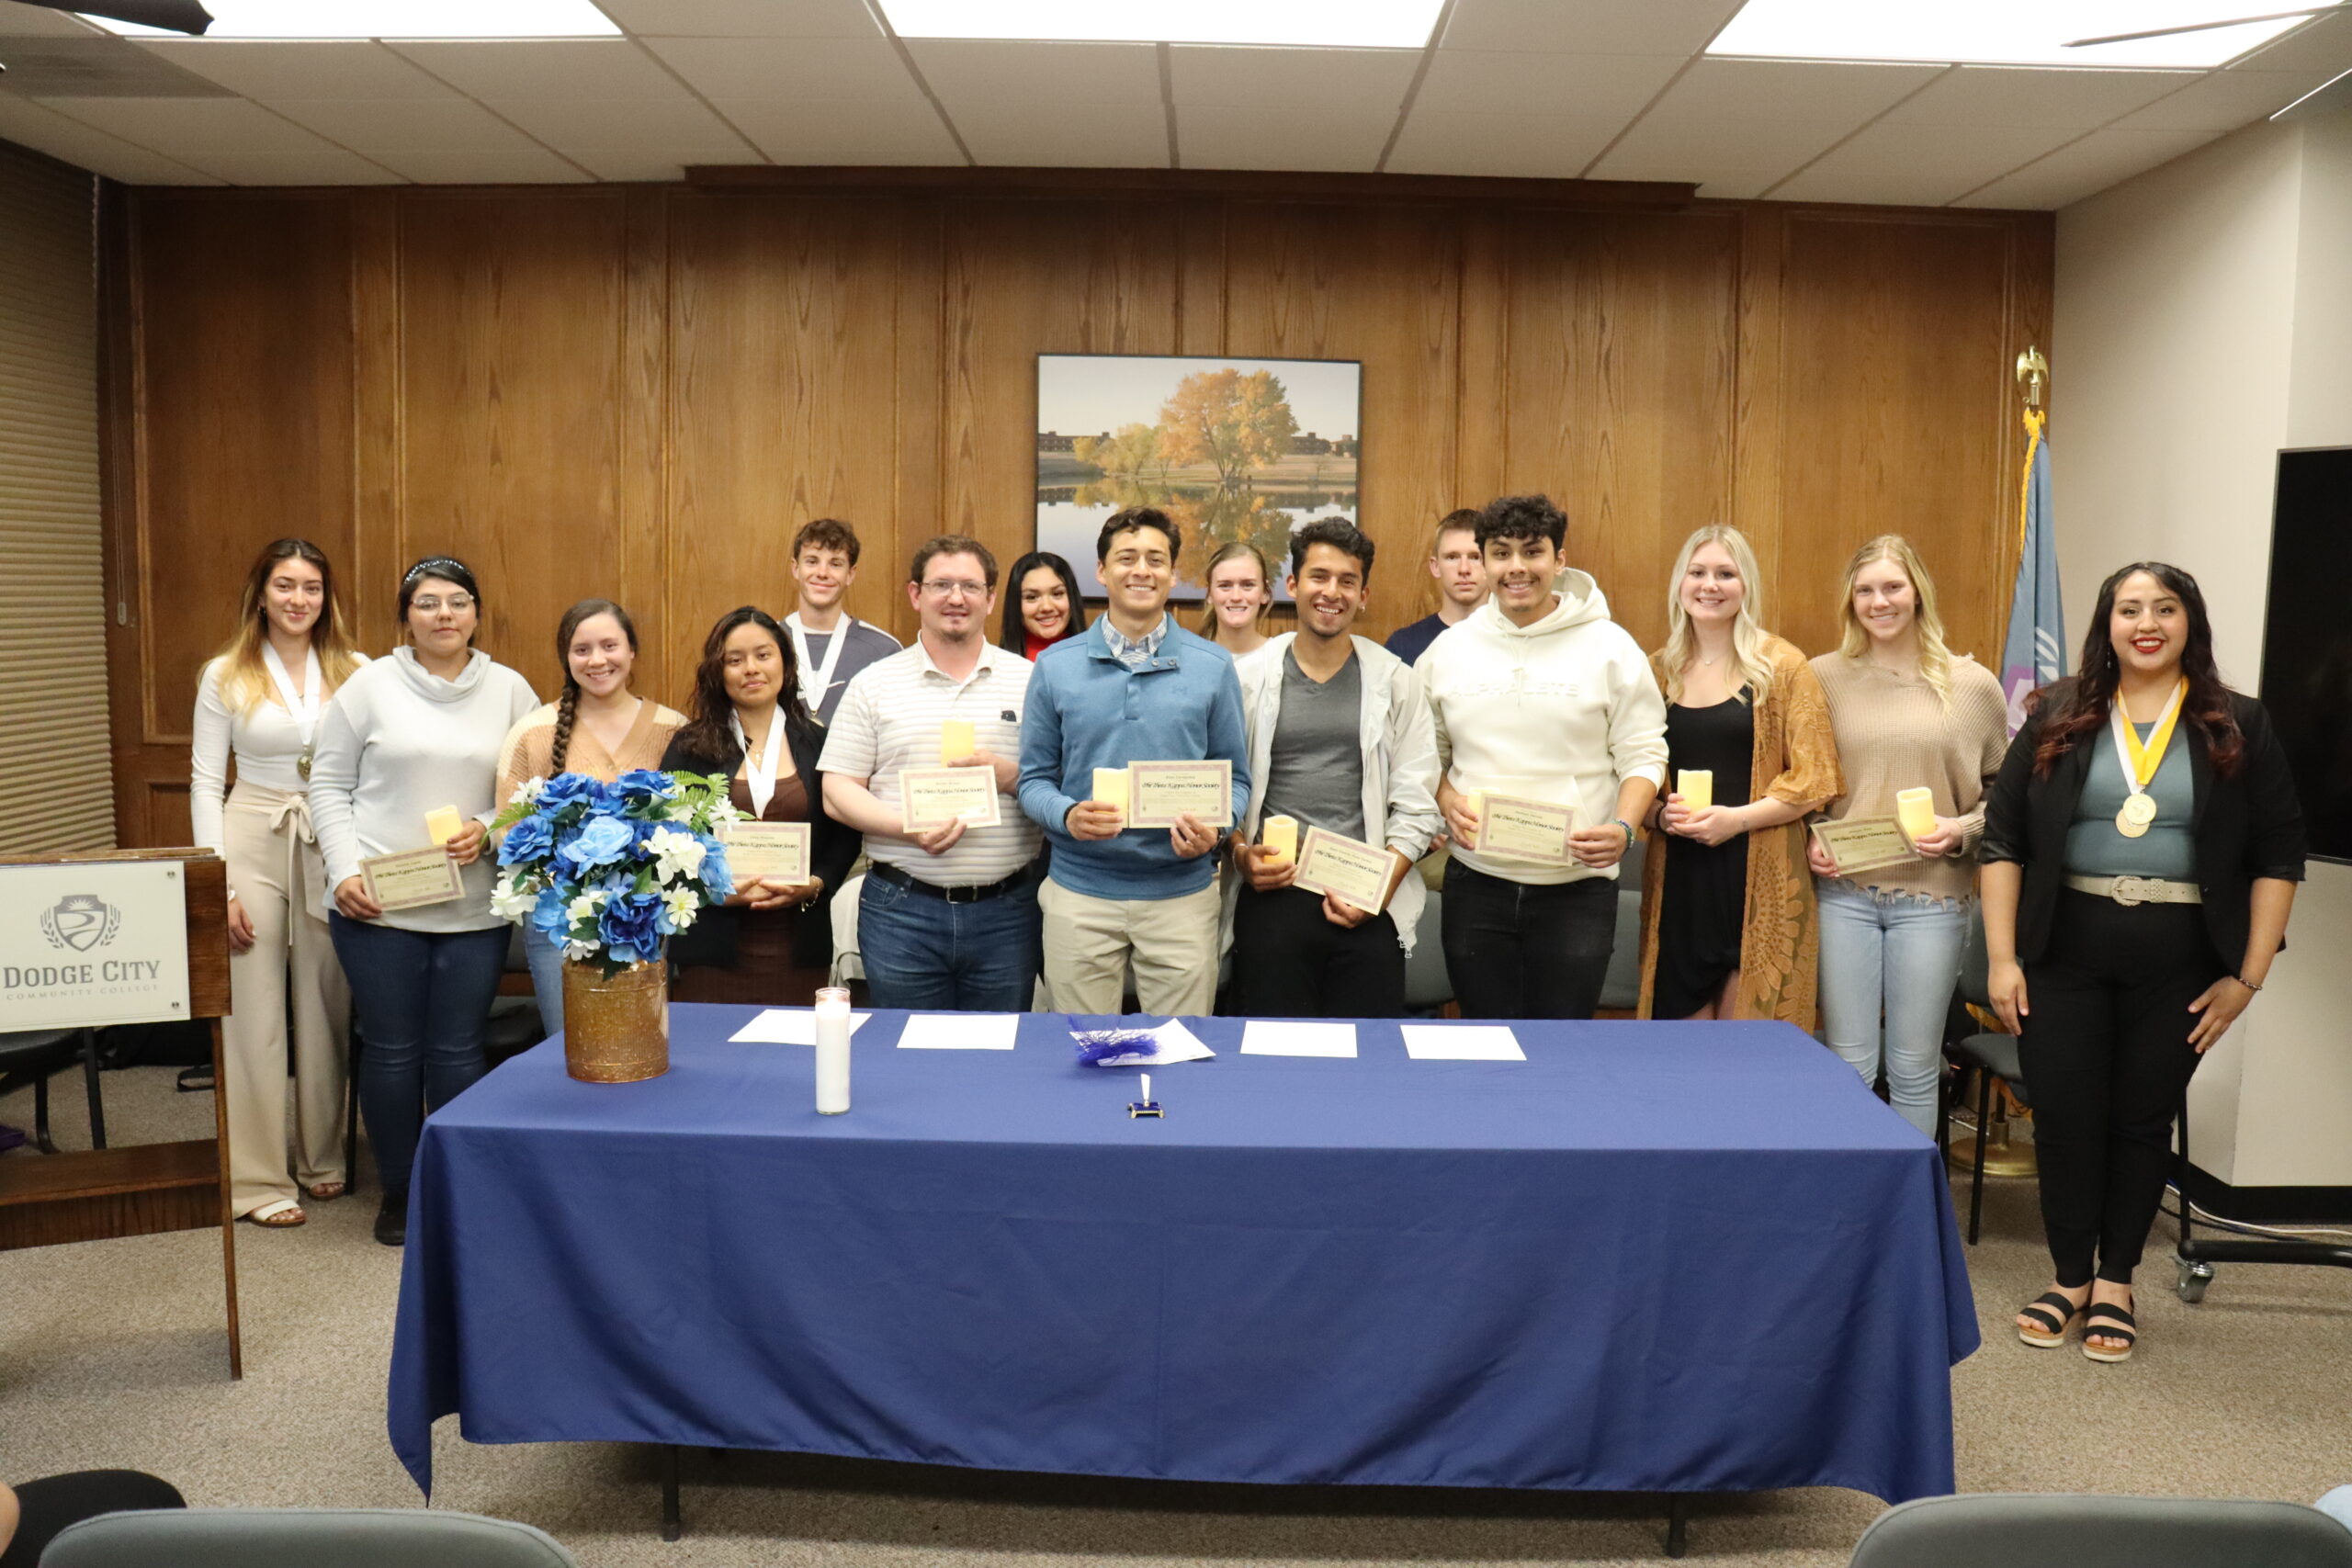 Pictured right to left (front row) are Olivia Ramos, PTK President, freshman from Dodge City, Kan.; Jennifer Katz, sophomore from Springfield, Neb.; Hailey Ellis, sophomore from Meade, Kan.; Damian Garcia, sophomore from Dodge City, Kan.; Juan Camilo Susa Cortes, freshman from Bogotá, Colombia; Alan Cervantes, sophomore from Cimarron, Kan.; Steven Brown, sophomore from Dodge City, Kan.; Litzy Rosales, freshman from Atlanta, Ga.; Olivia Ortiz, sophomore from Dodge City, Kan.; Yesenia Lopez, sophomore from Dodge City, Kan.; Perla Acuna, freshman from Norcross, Ga.; (back row) Reese Unruh, freshman from Greensburg, Kan.;  Addison Spencer, freshman from Vernon, Texas; Brisa Ontiberos, freshman from Dodge City, Kan.; and Janik Buch, freshman from Süderbrarup, Germany. [Photo by Luke Fay]